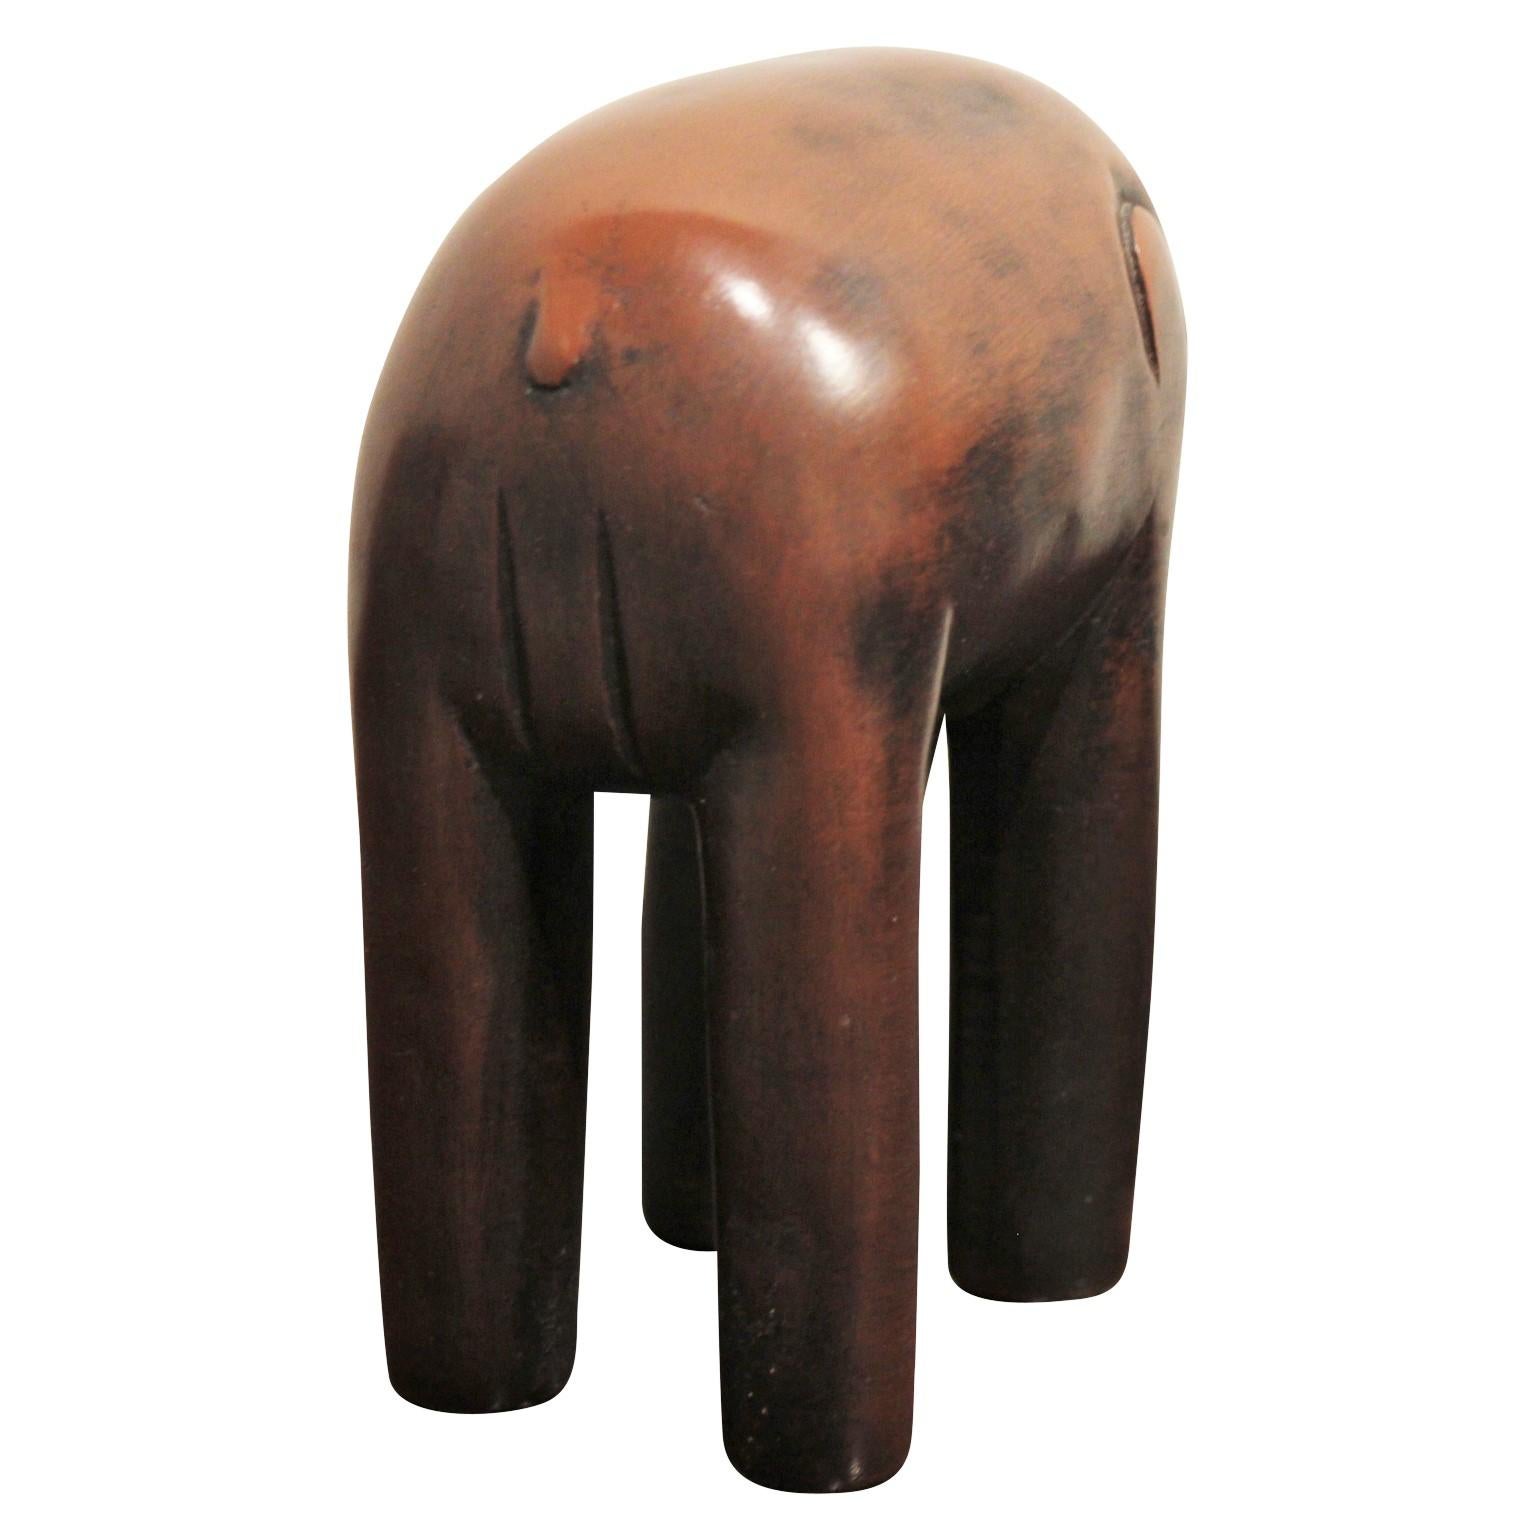 Ceramic Tribal Elephant Sculpture - Black Abstract Sculpture by Austin Productions